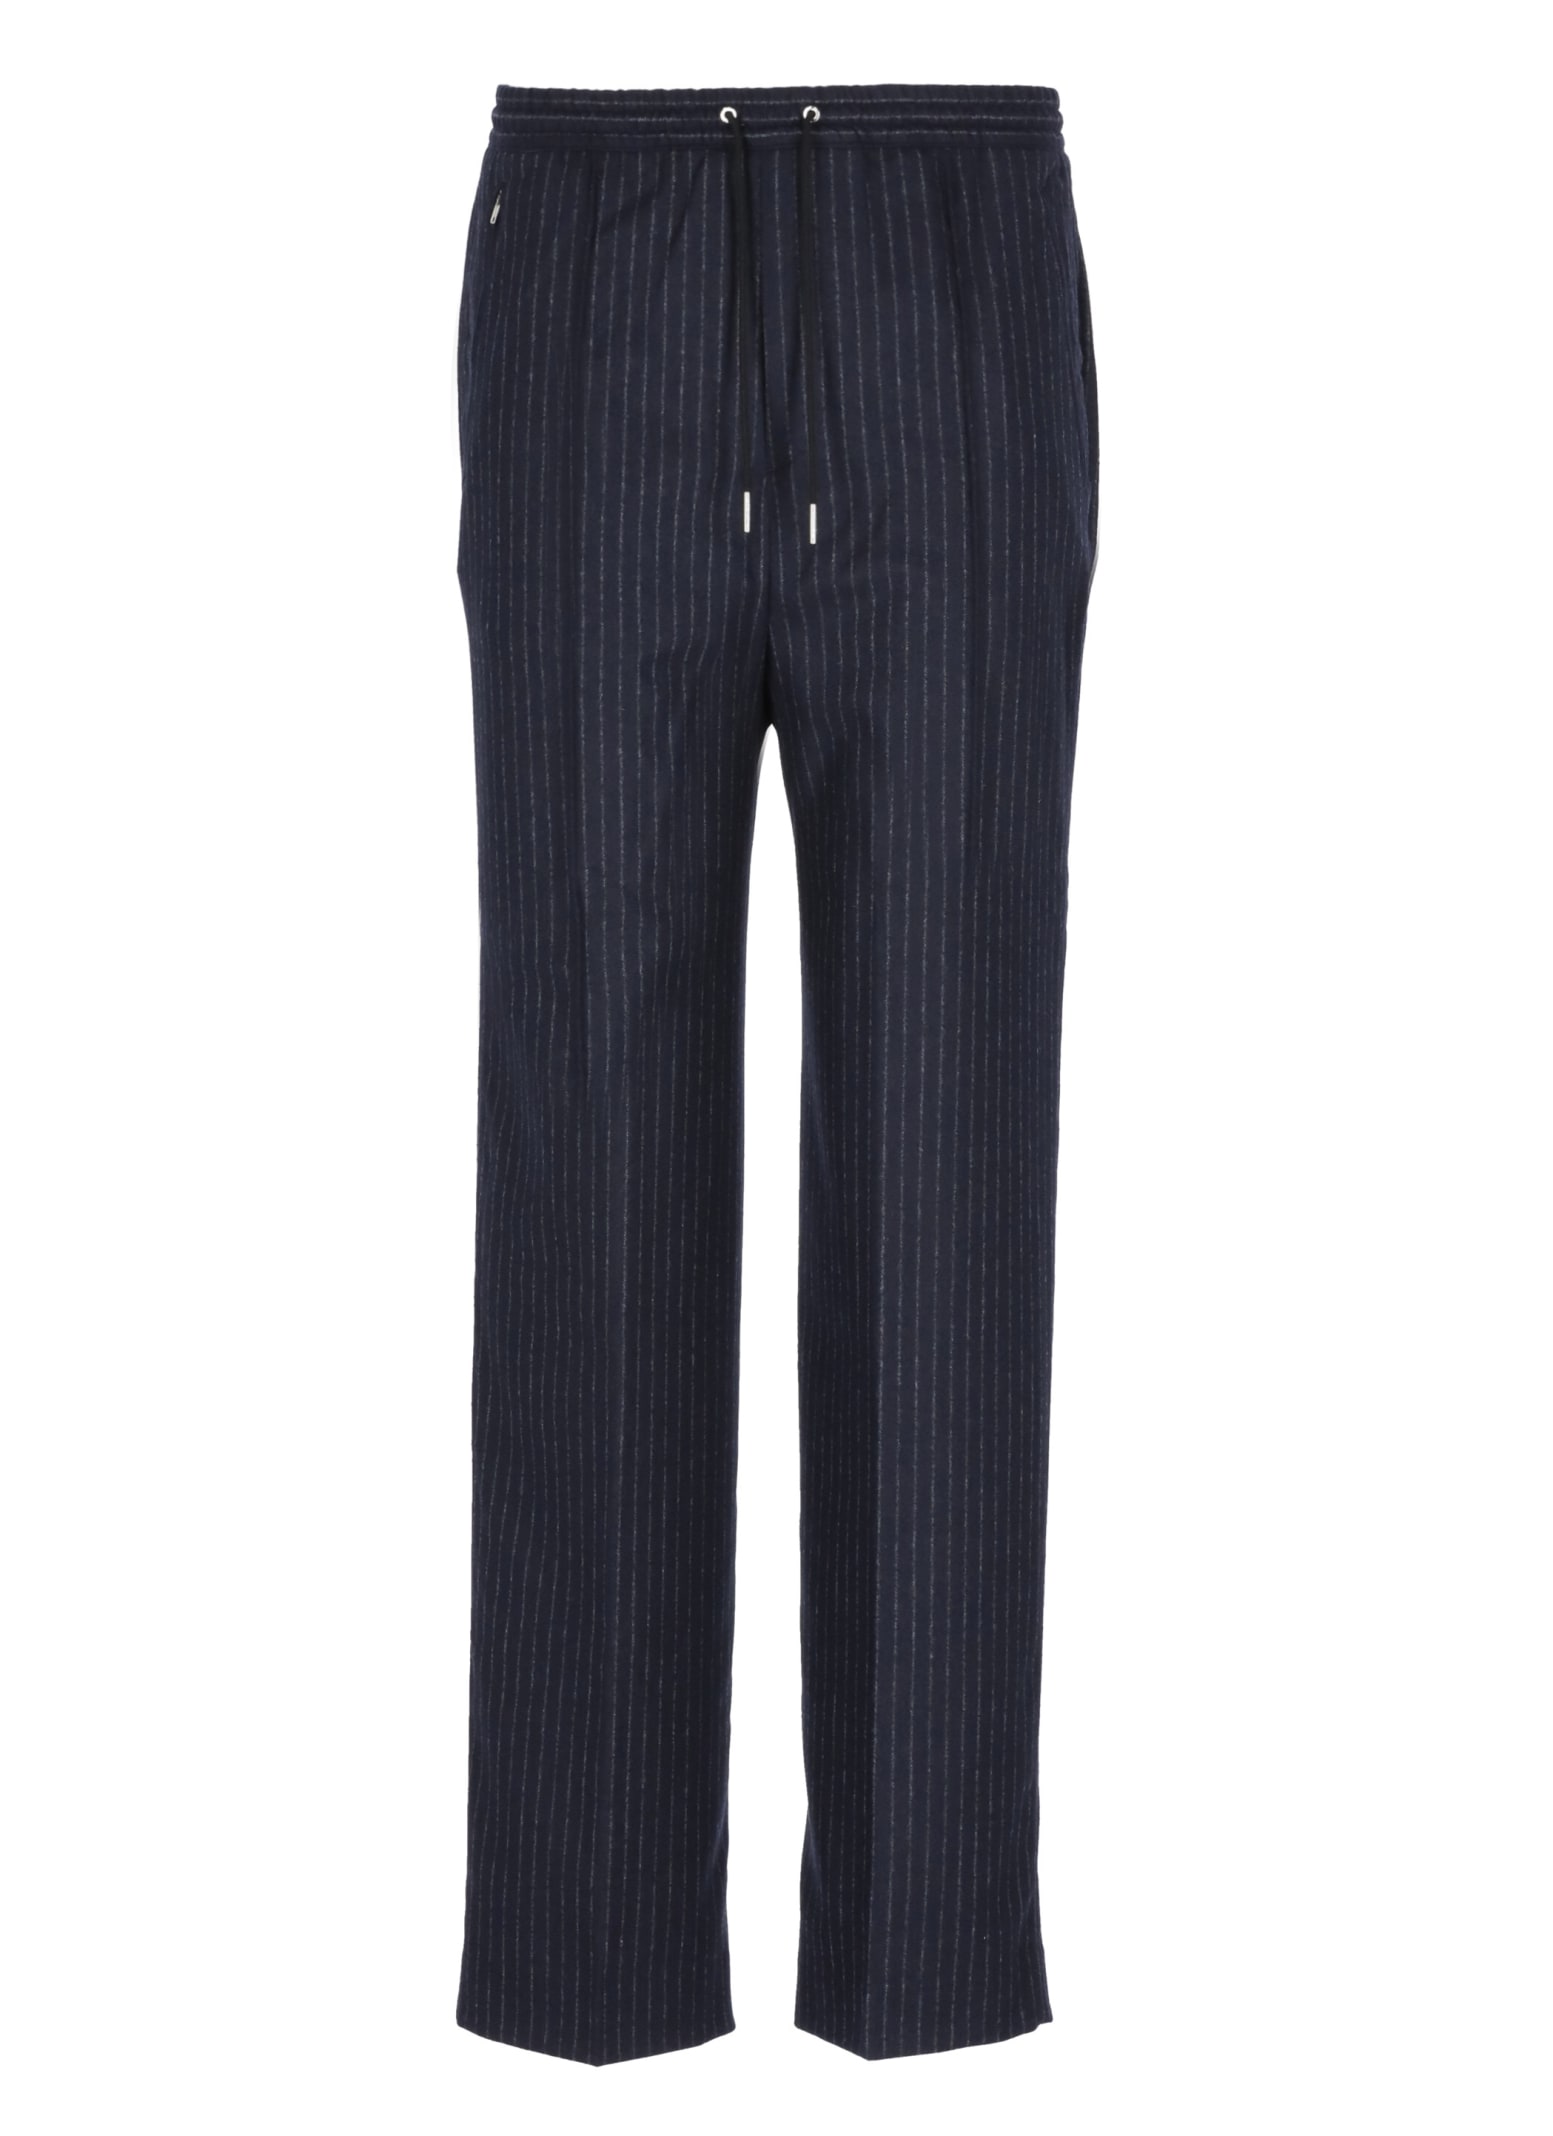 Tommy Hilfiger Wool Europe Trousers